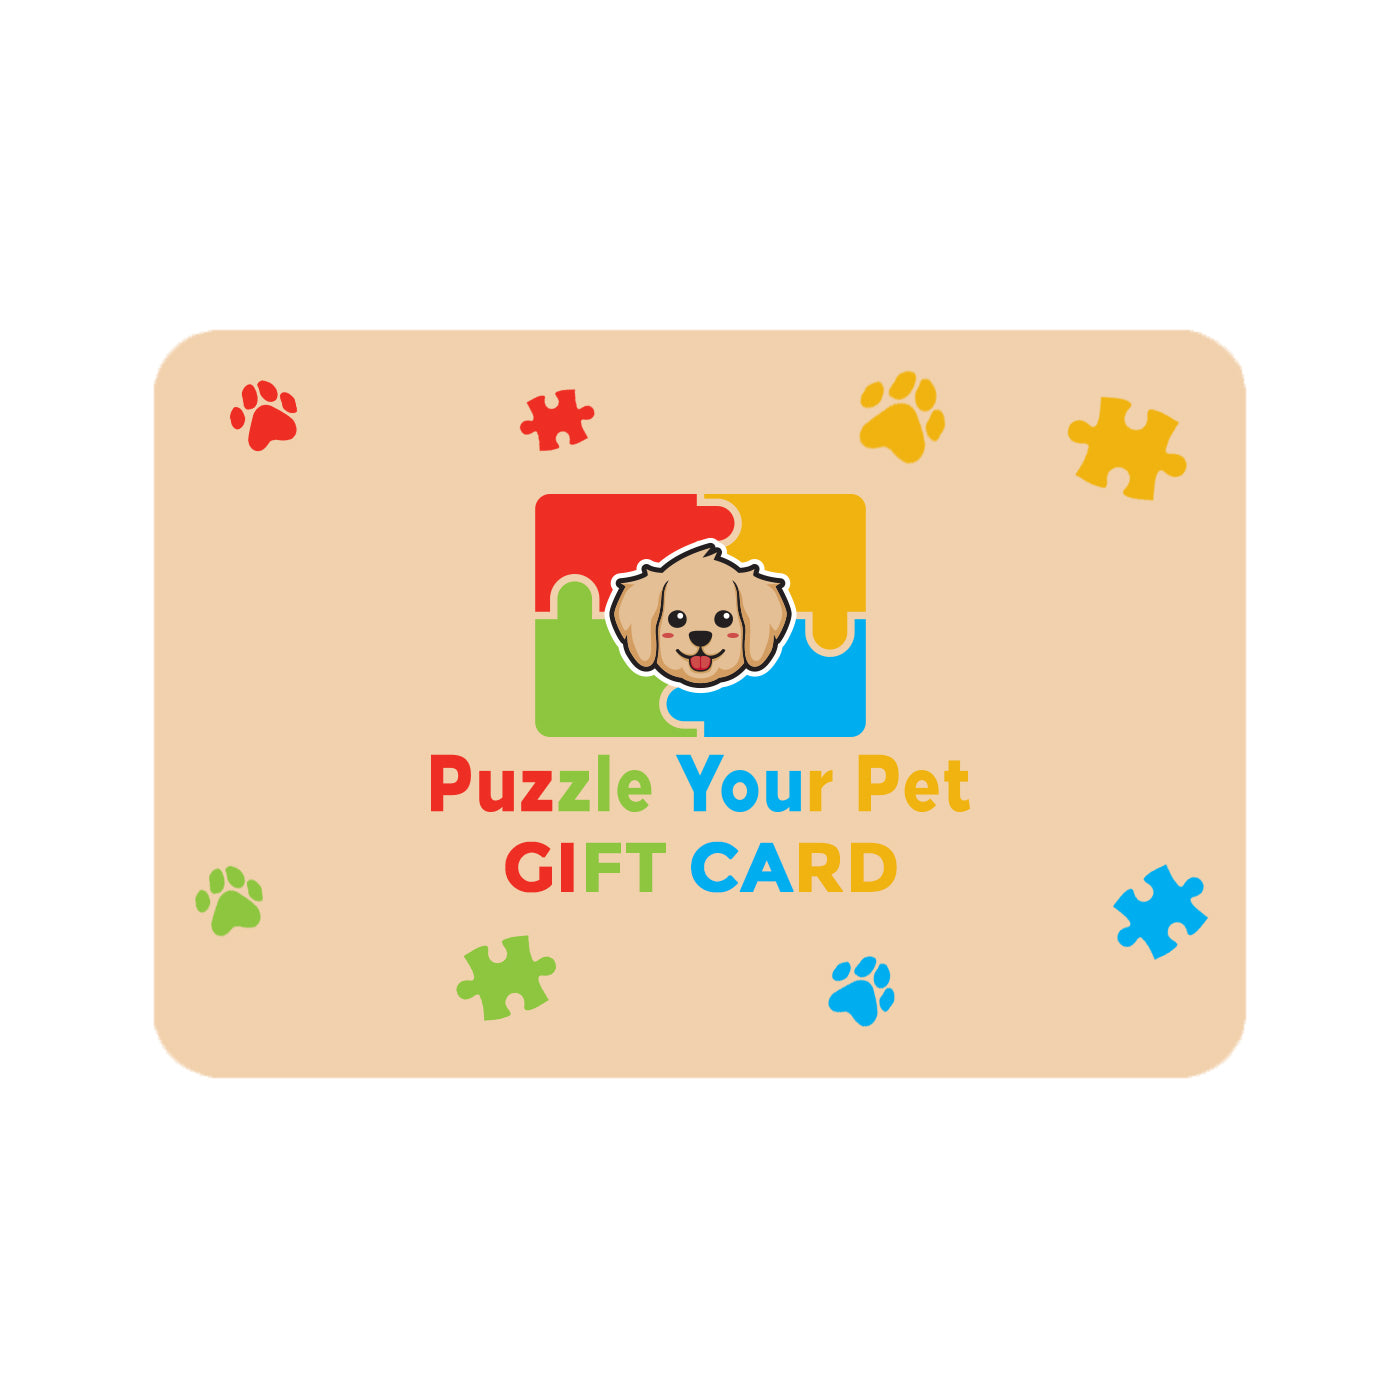 Puzzle Your Pet Gift Card - Puzzleyourpet